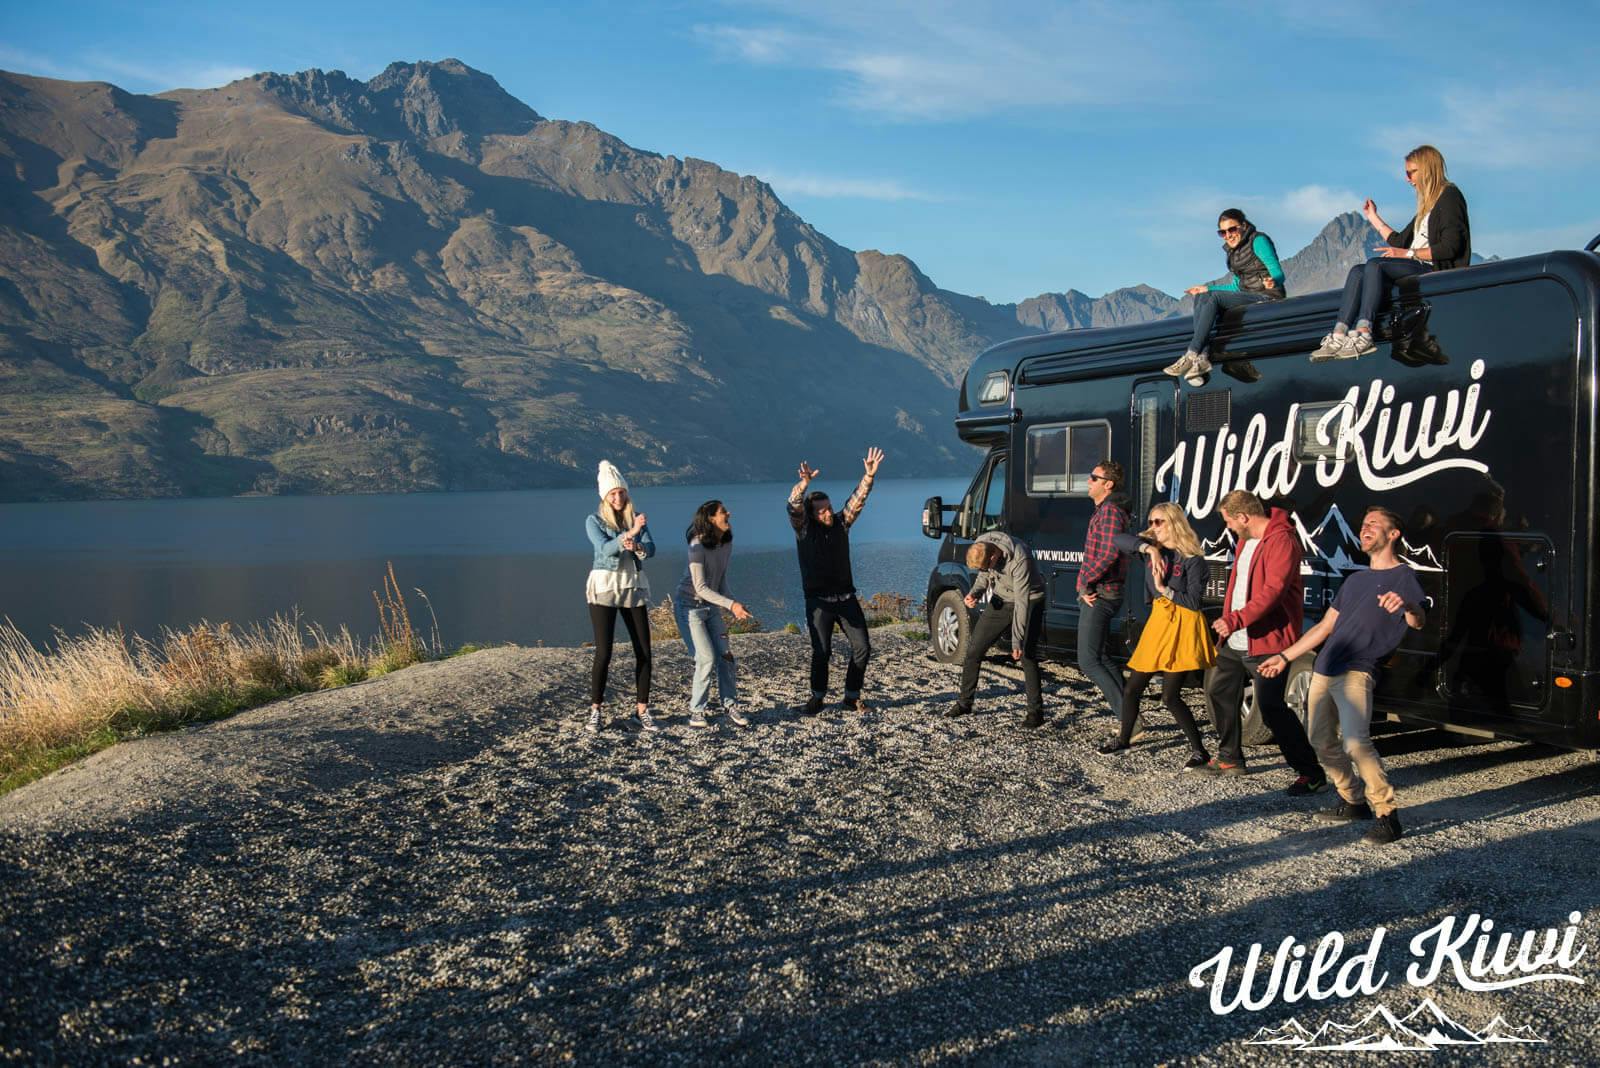 Take a road tour of New Zealand - Hang out with excellent people on the way